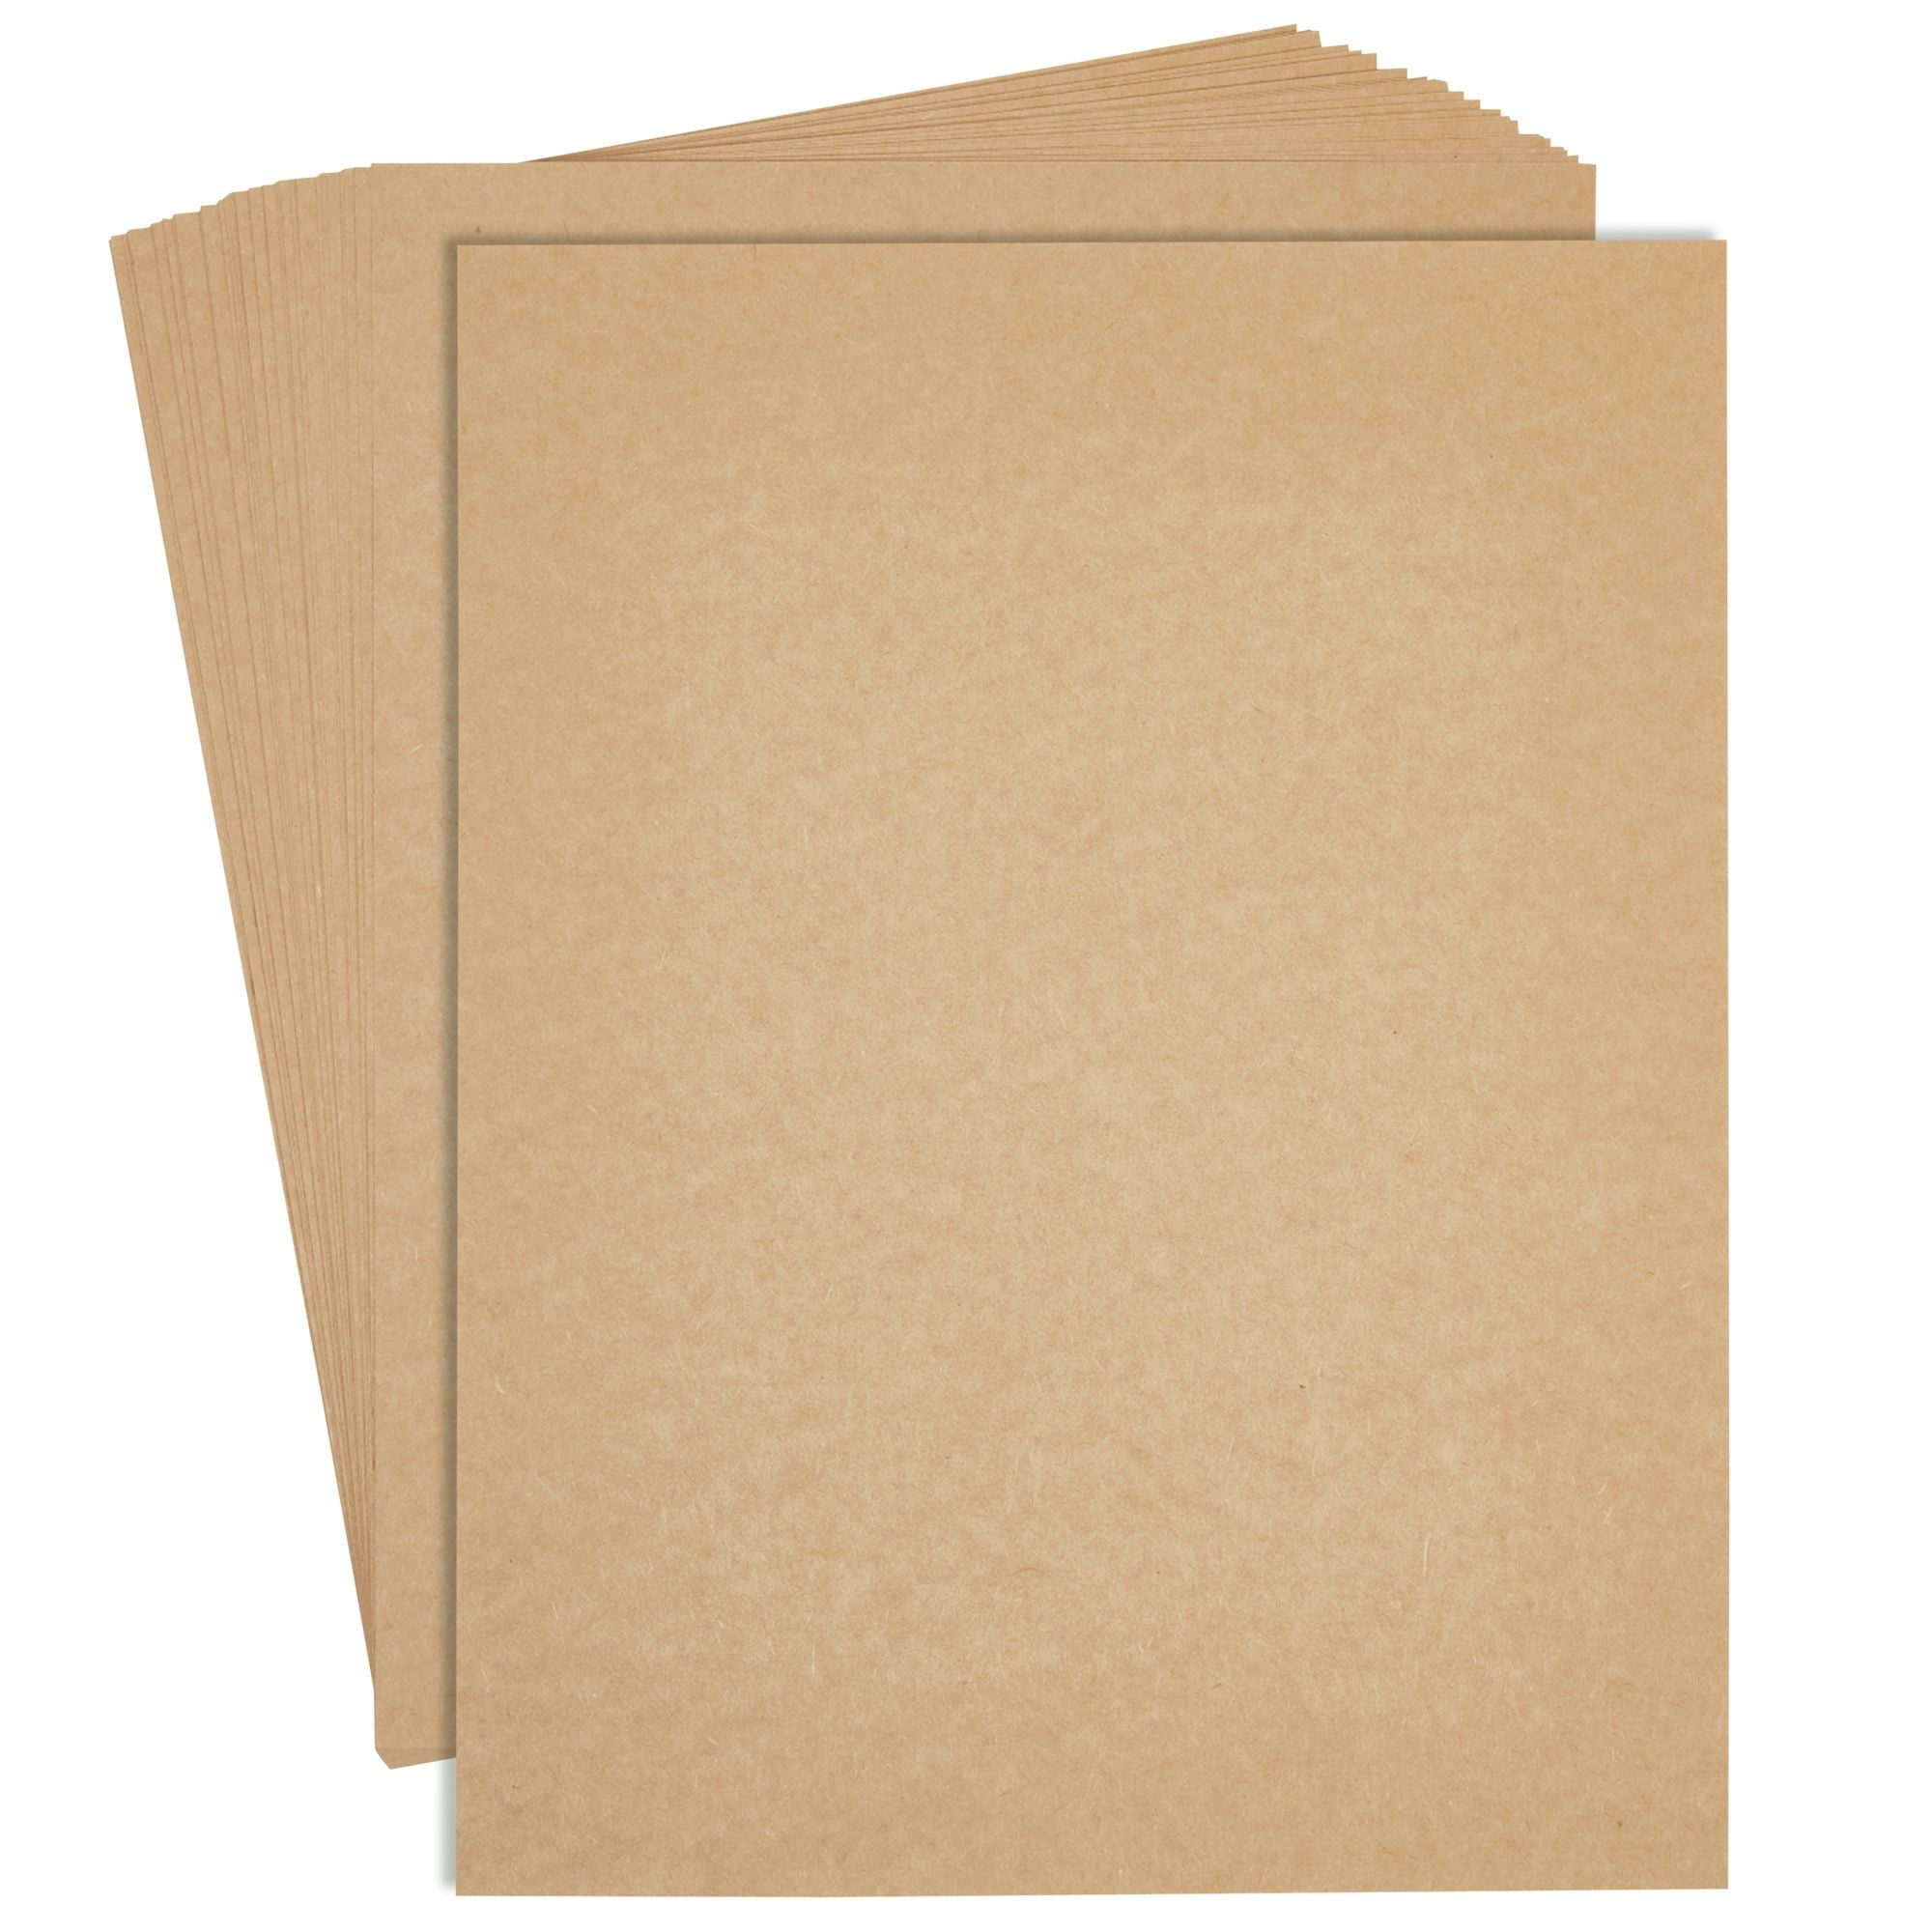 48-Pack Kraft Paper Sheets for Wedding, Brown Cardstock for Party  Invitations, Announcements, Drawing, DIY Projects, Arts and Crafts, Letter  Size, 120gsm (8.5 x 11 Inches) 